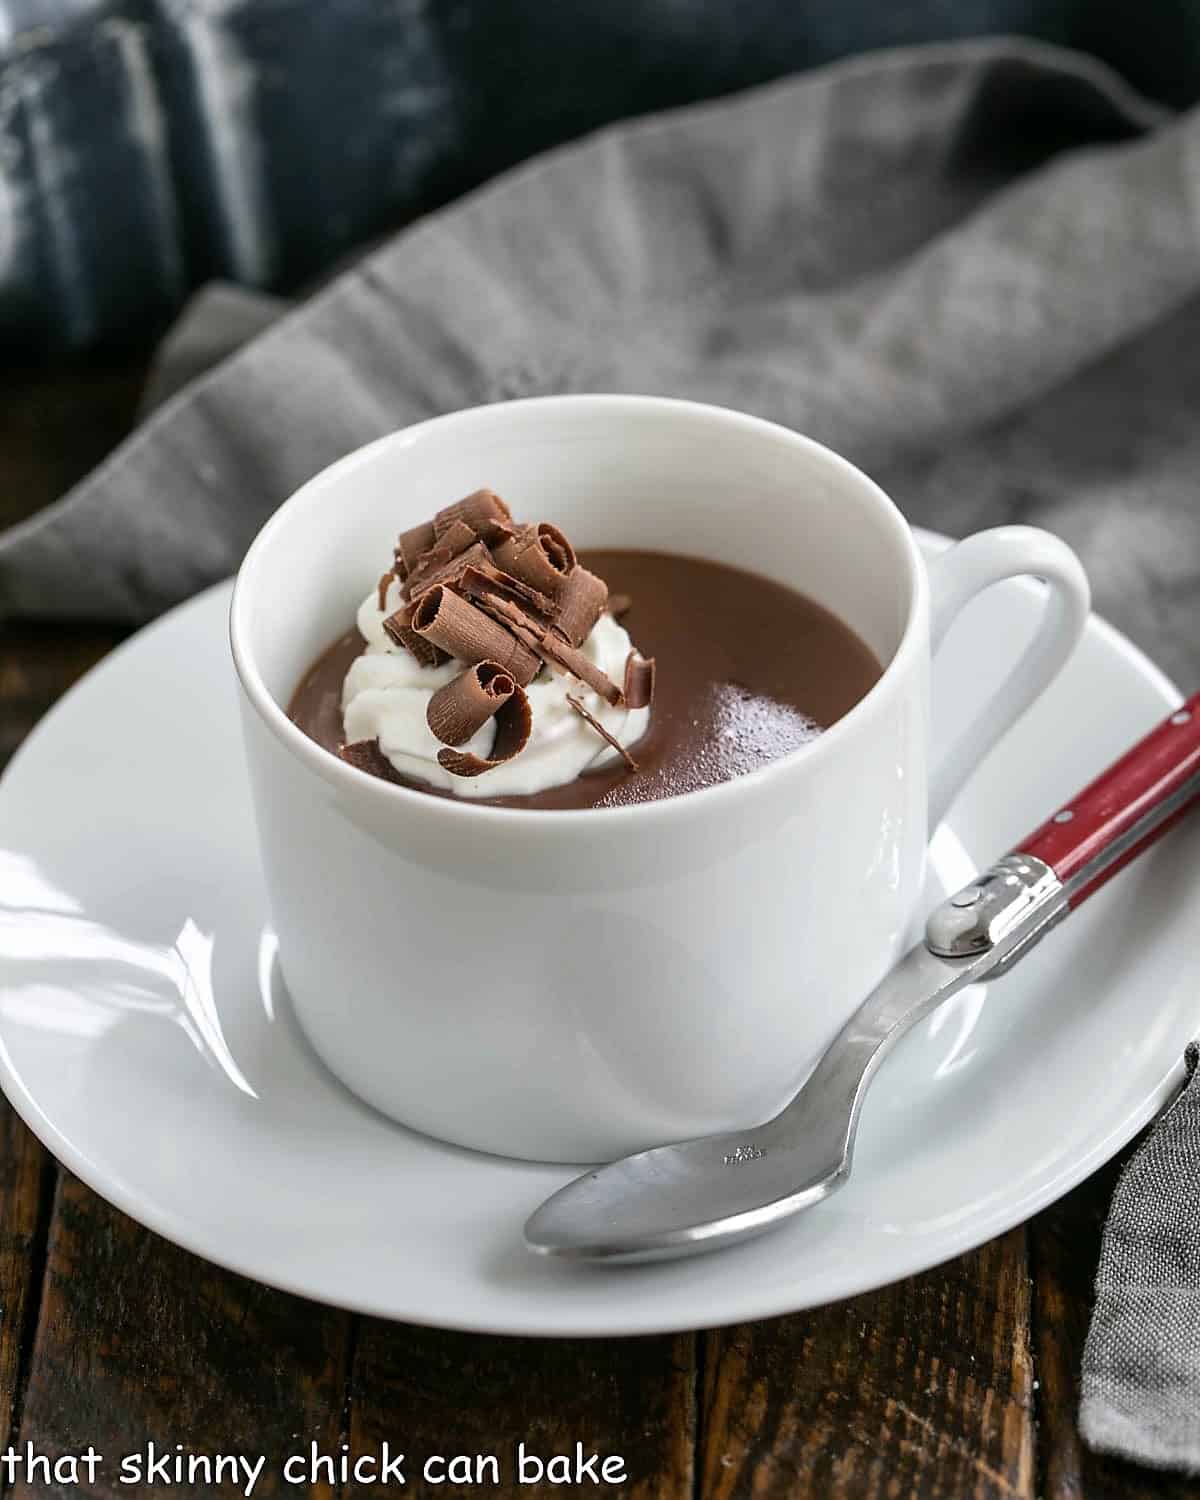 Cup of Italian hot chocolate topped with whipped cream and chocolate shavings.